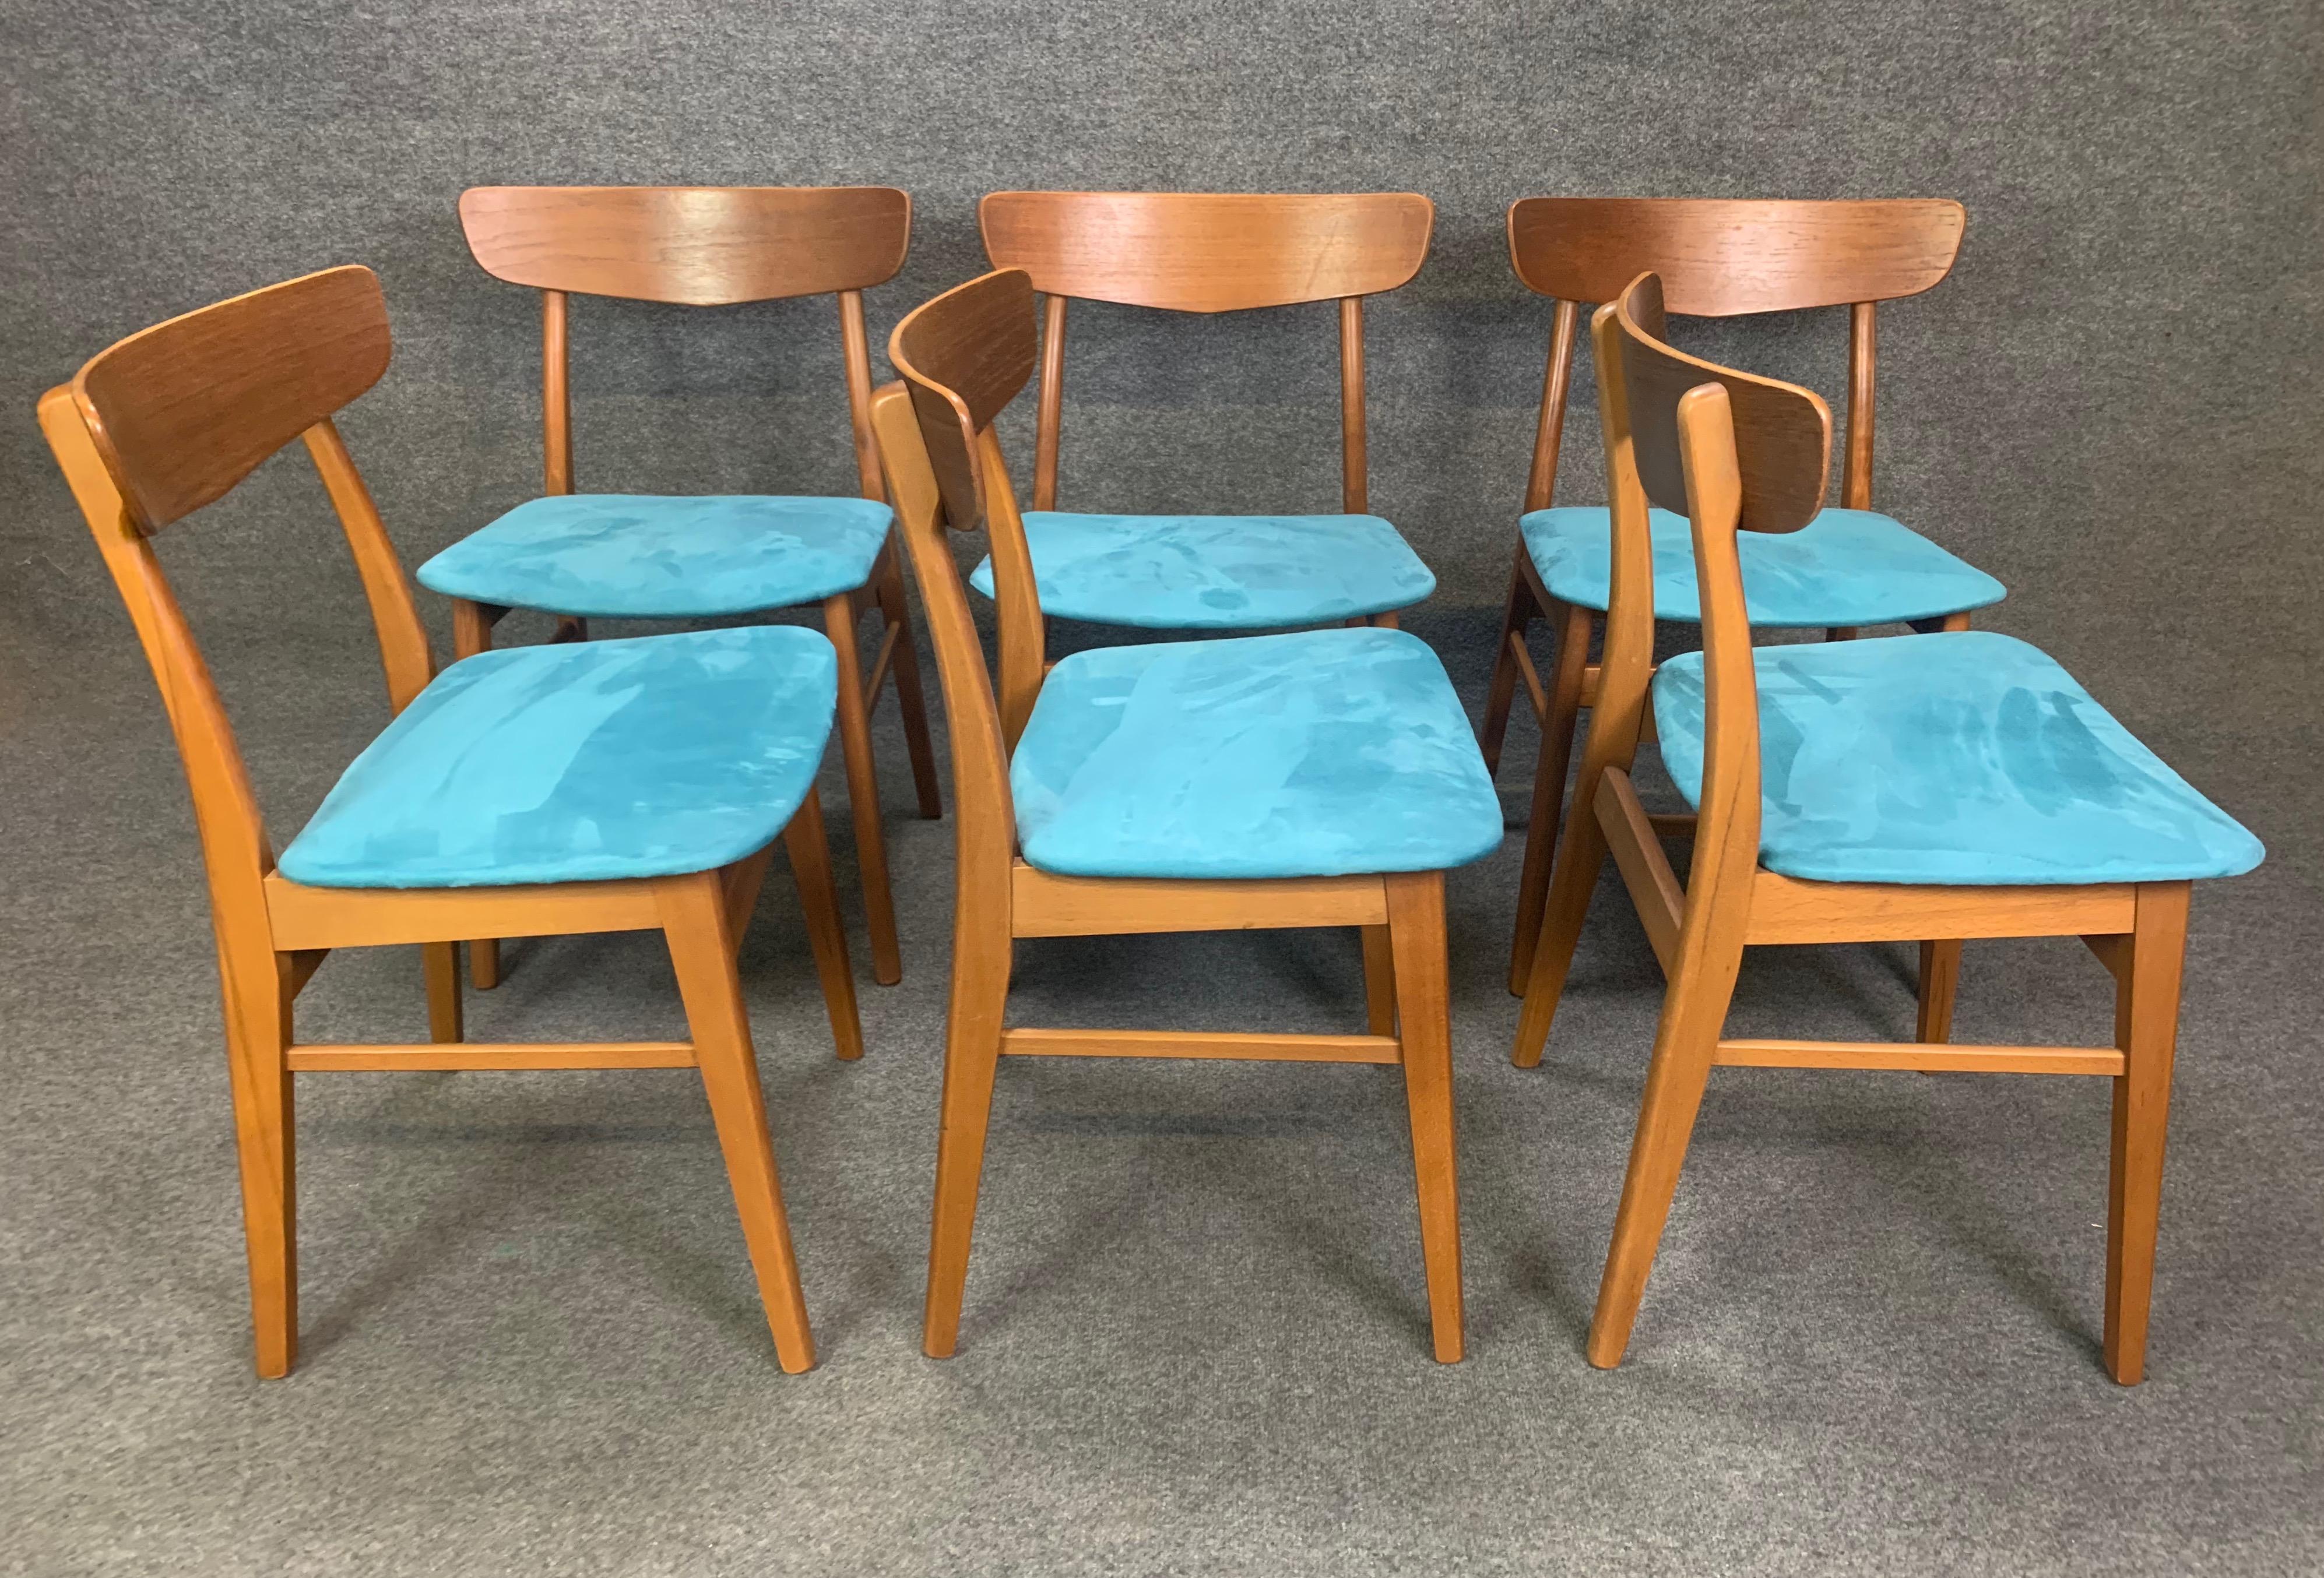 Set of Six Vintage Midcentury Danish Modern Teak Dining Chairs by Findhahls For Sale 2